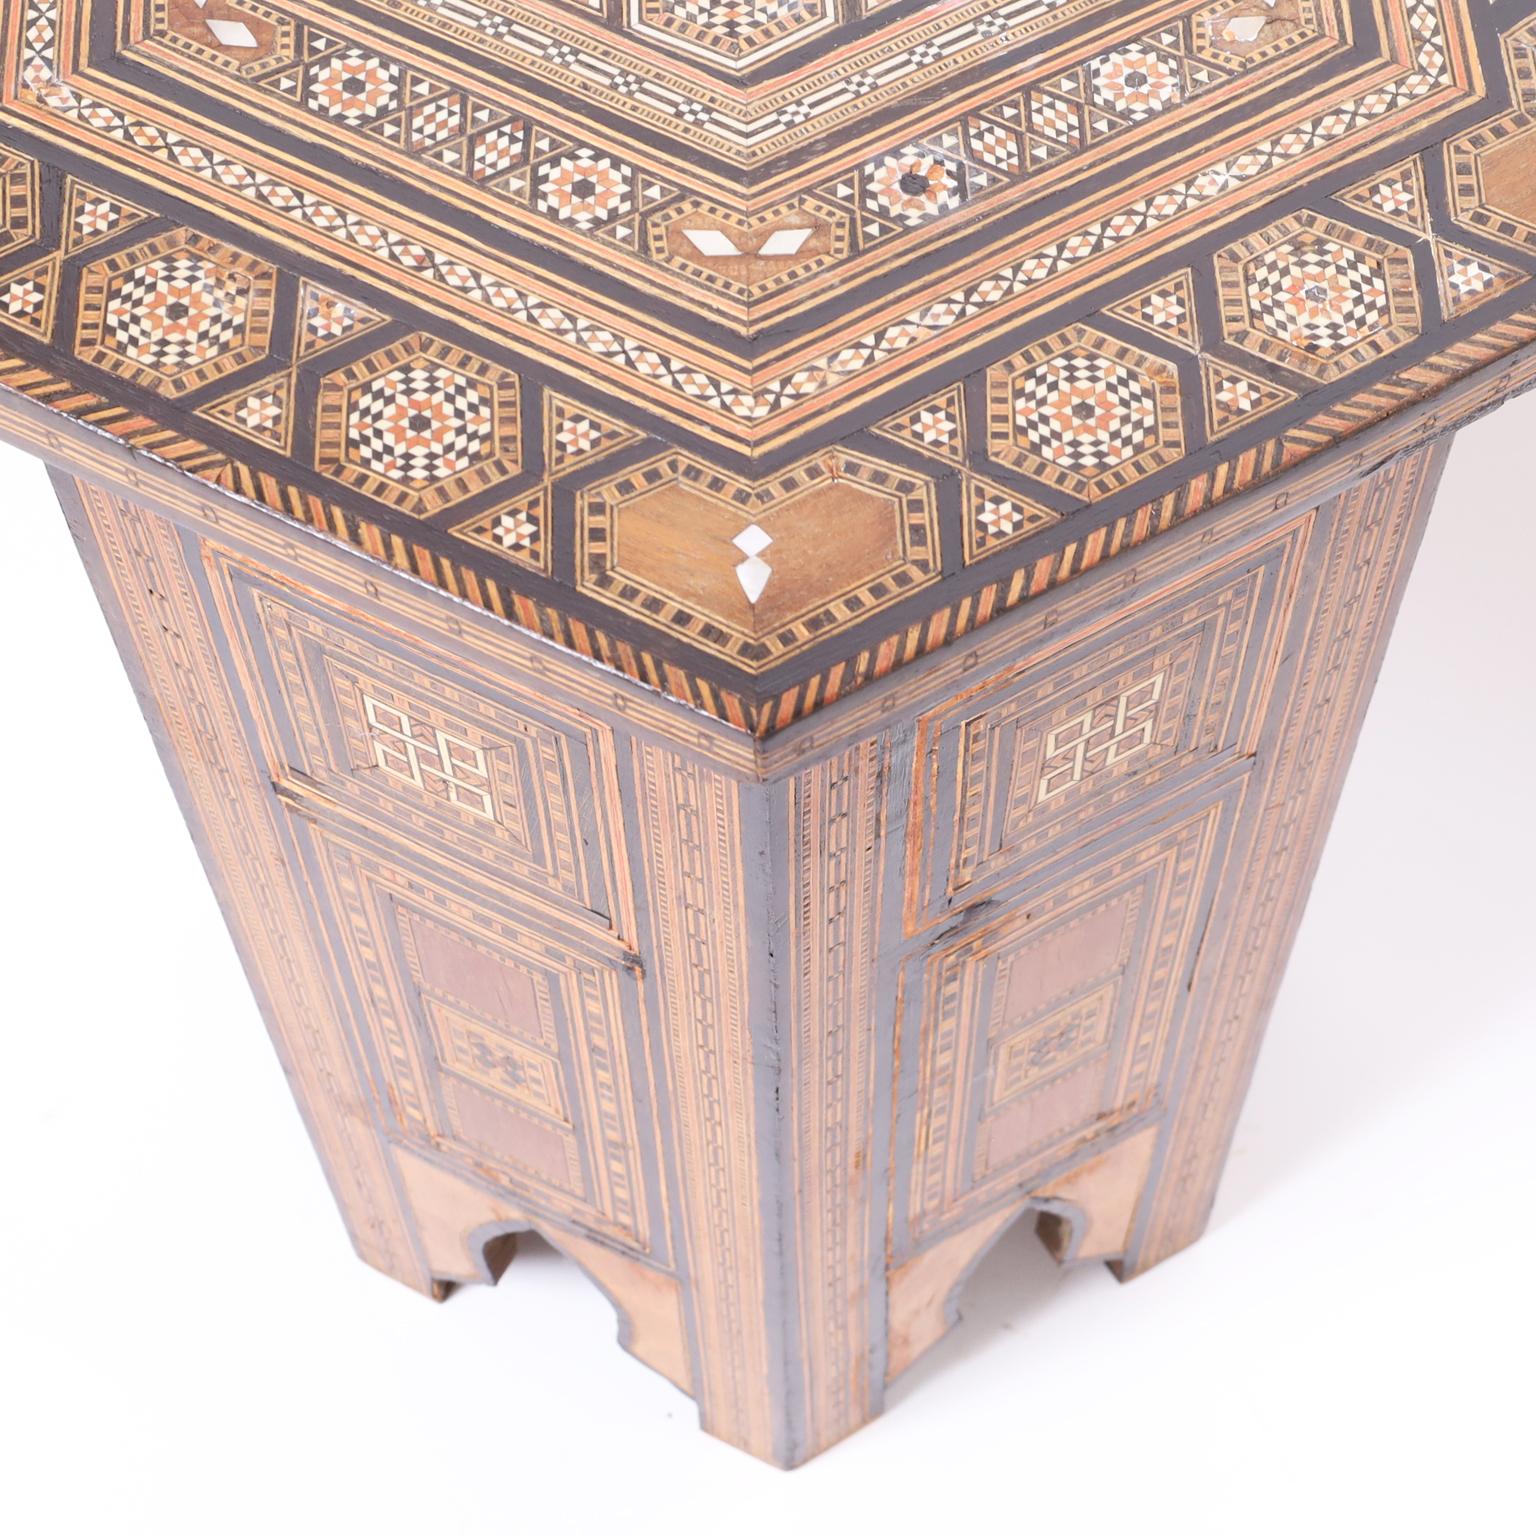 20th Century Moroccan Inlaid Stand